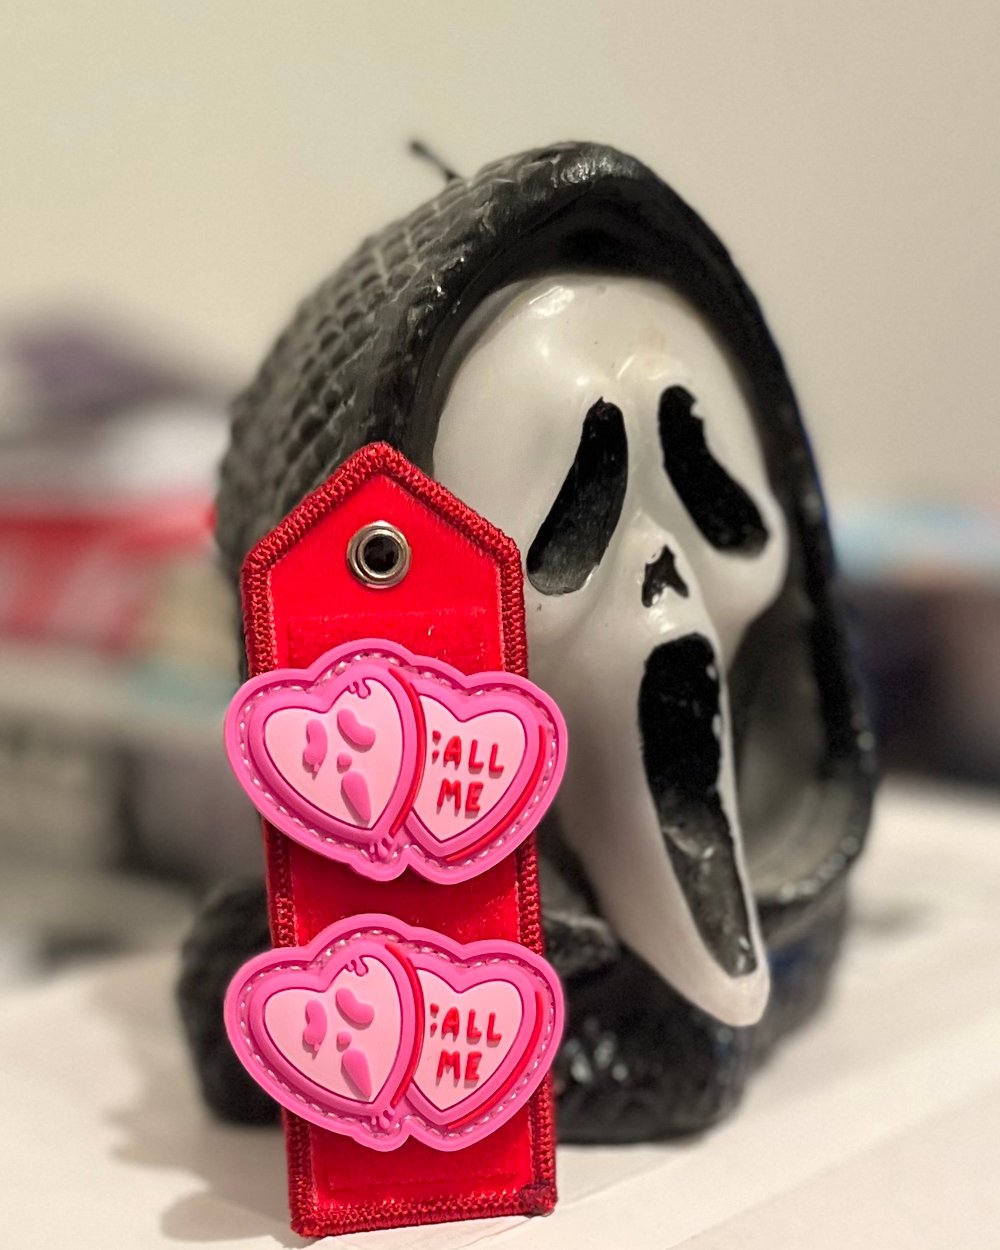 Killer Candy Heart Patches